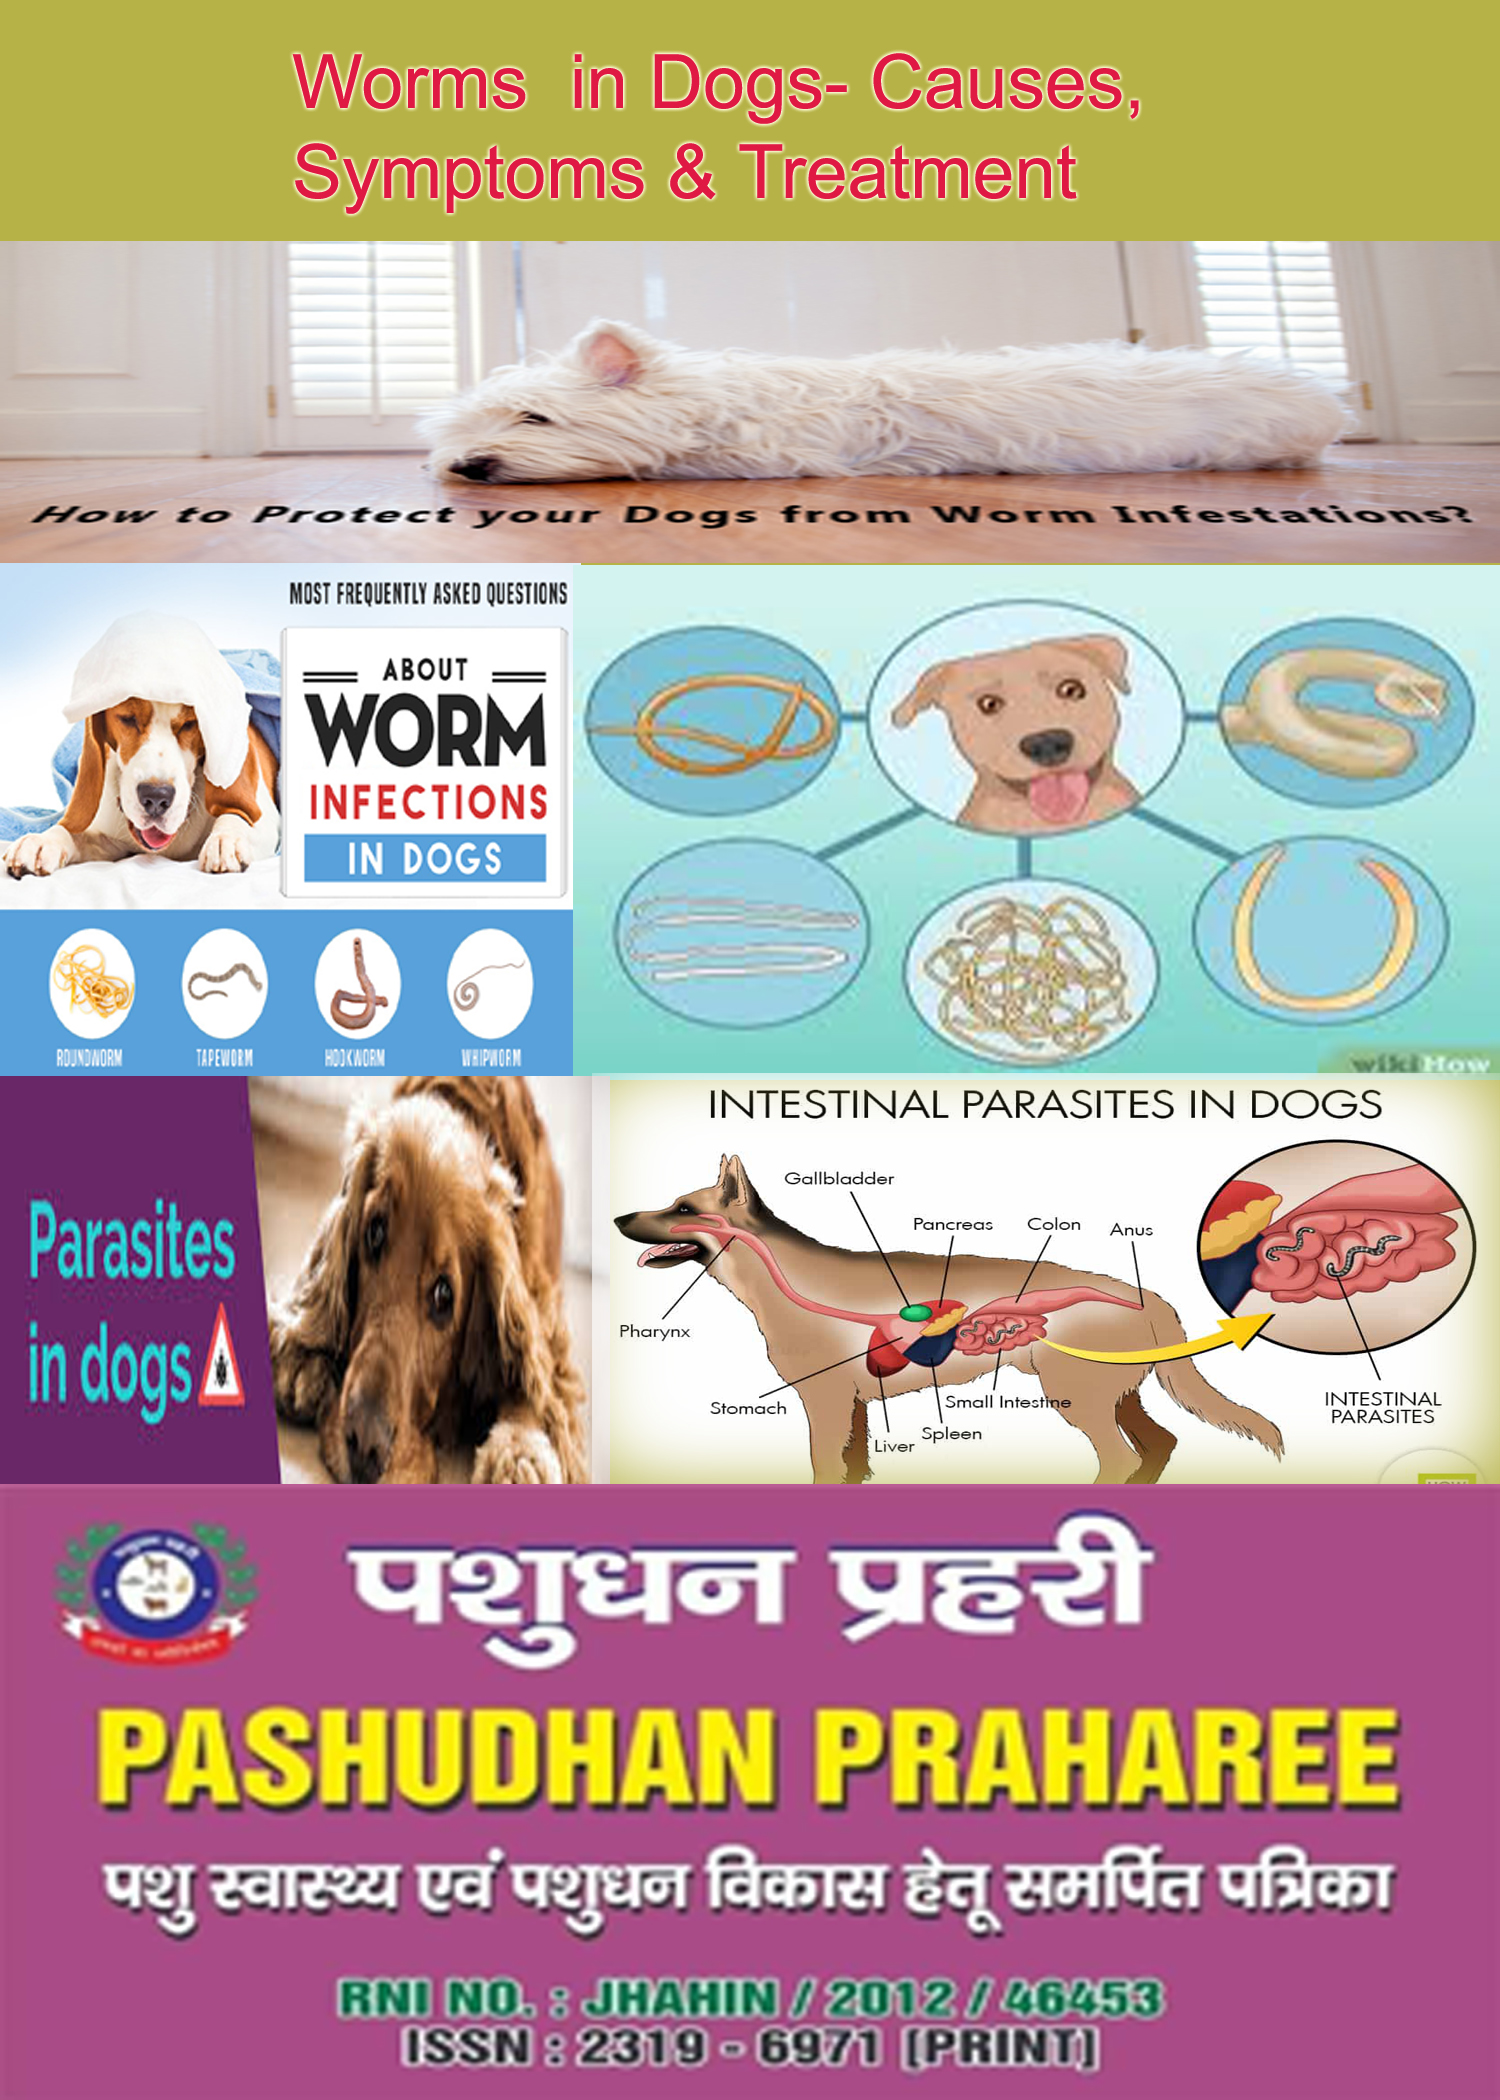 Worms in Dogs- Causes, Symptoms & Treatment – Pashudhan praharee